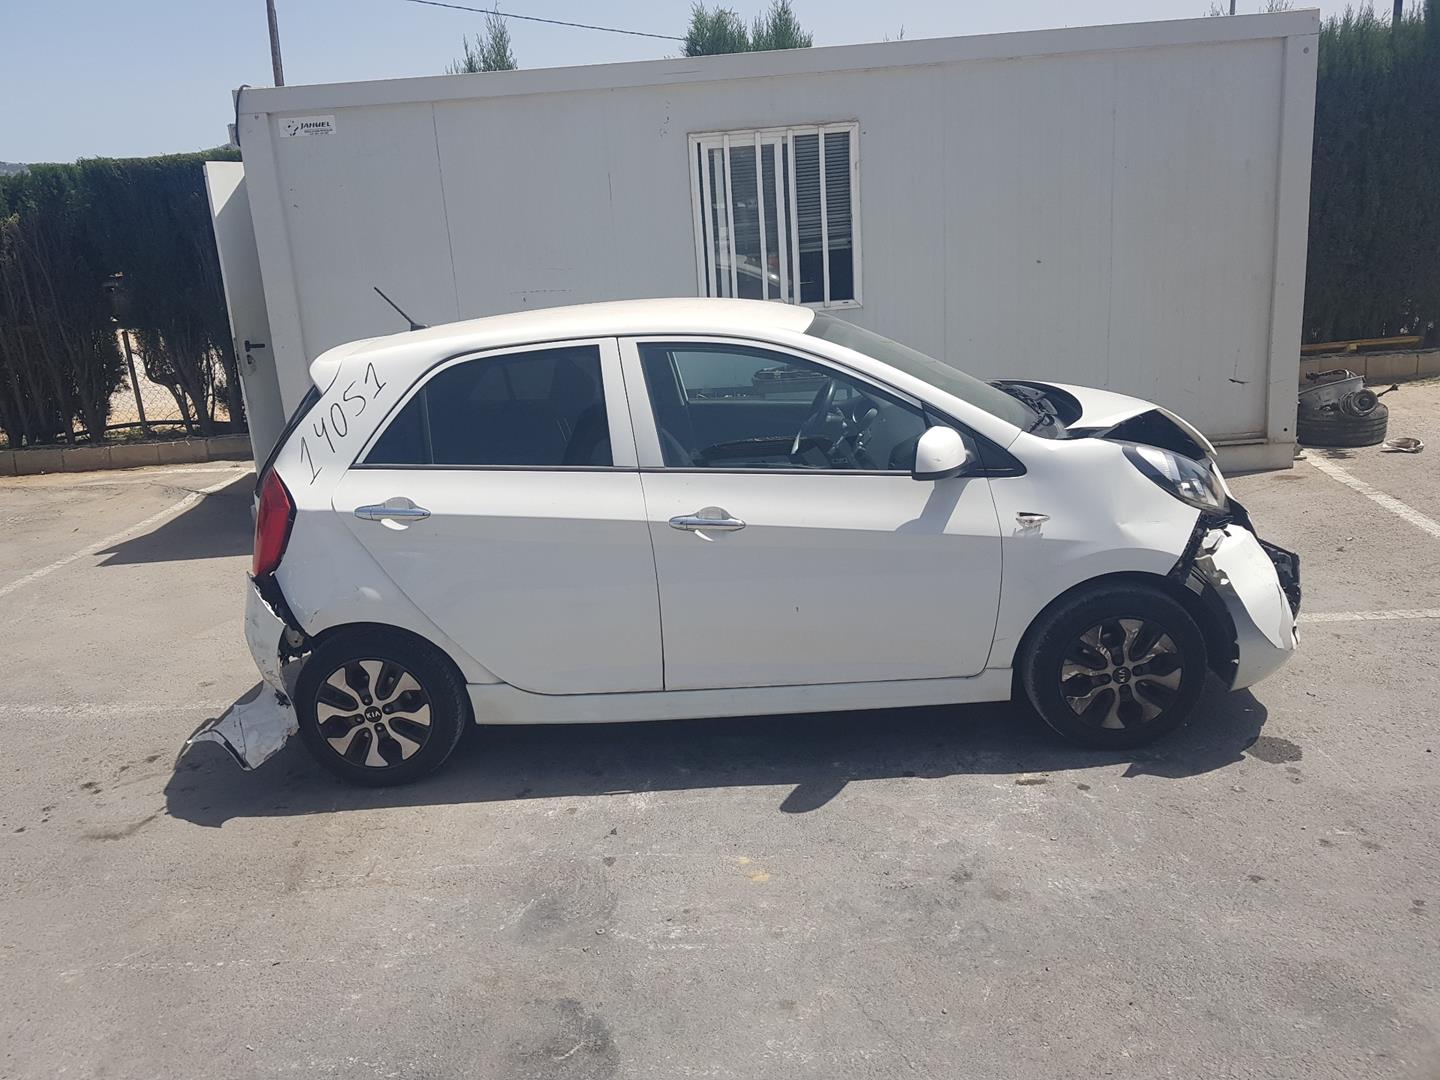 KIA Picanto 2 generation (2011-2017) Other Body Parts 351904A700 23621505